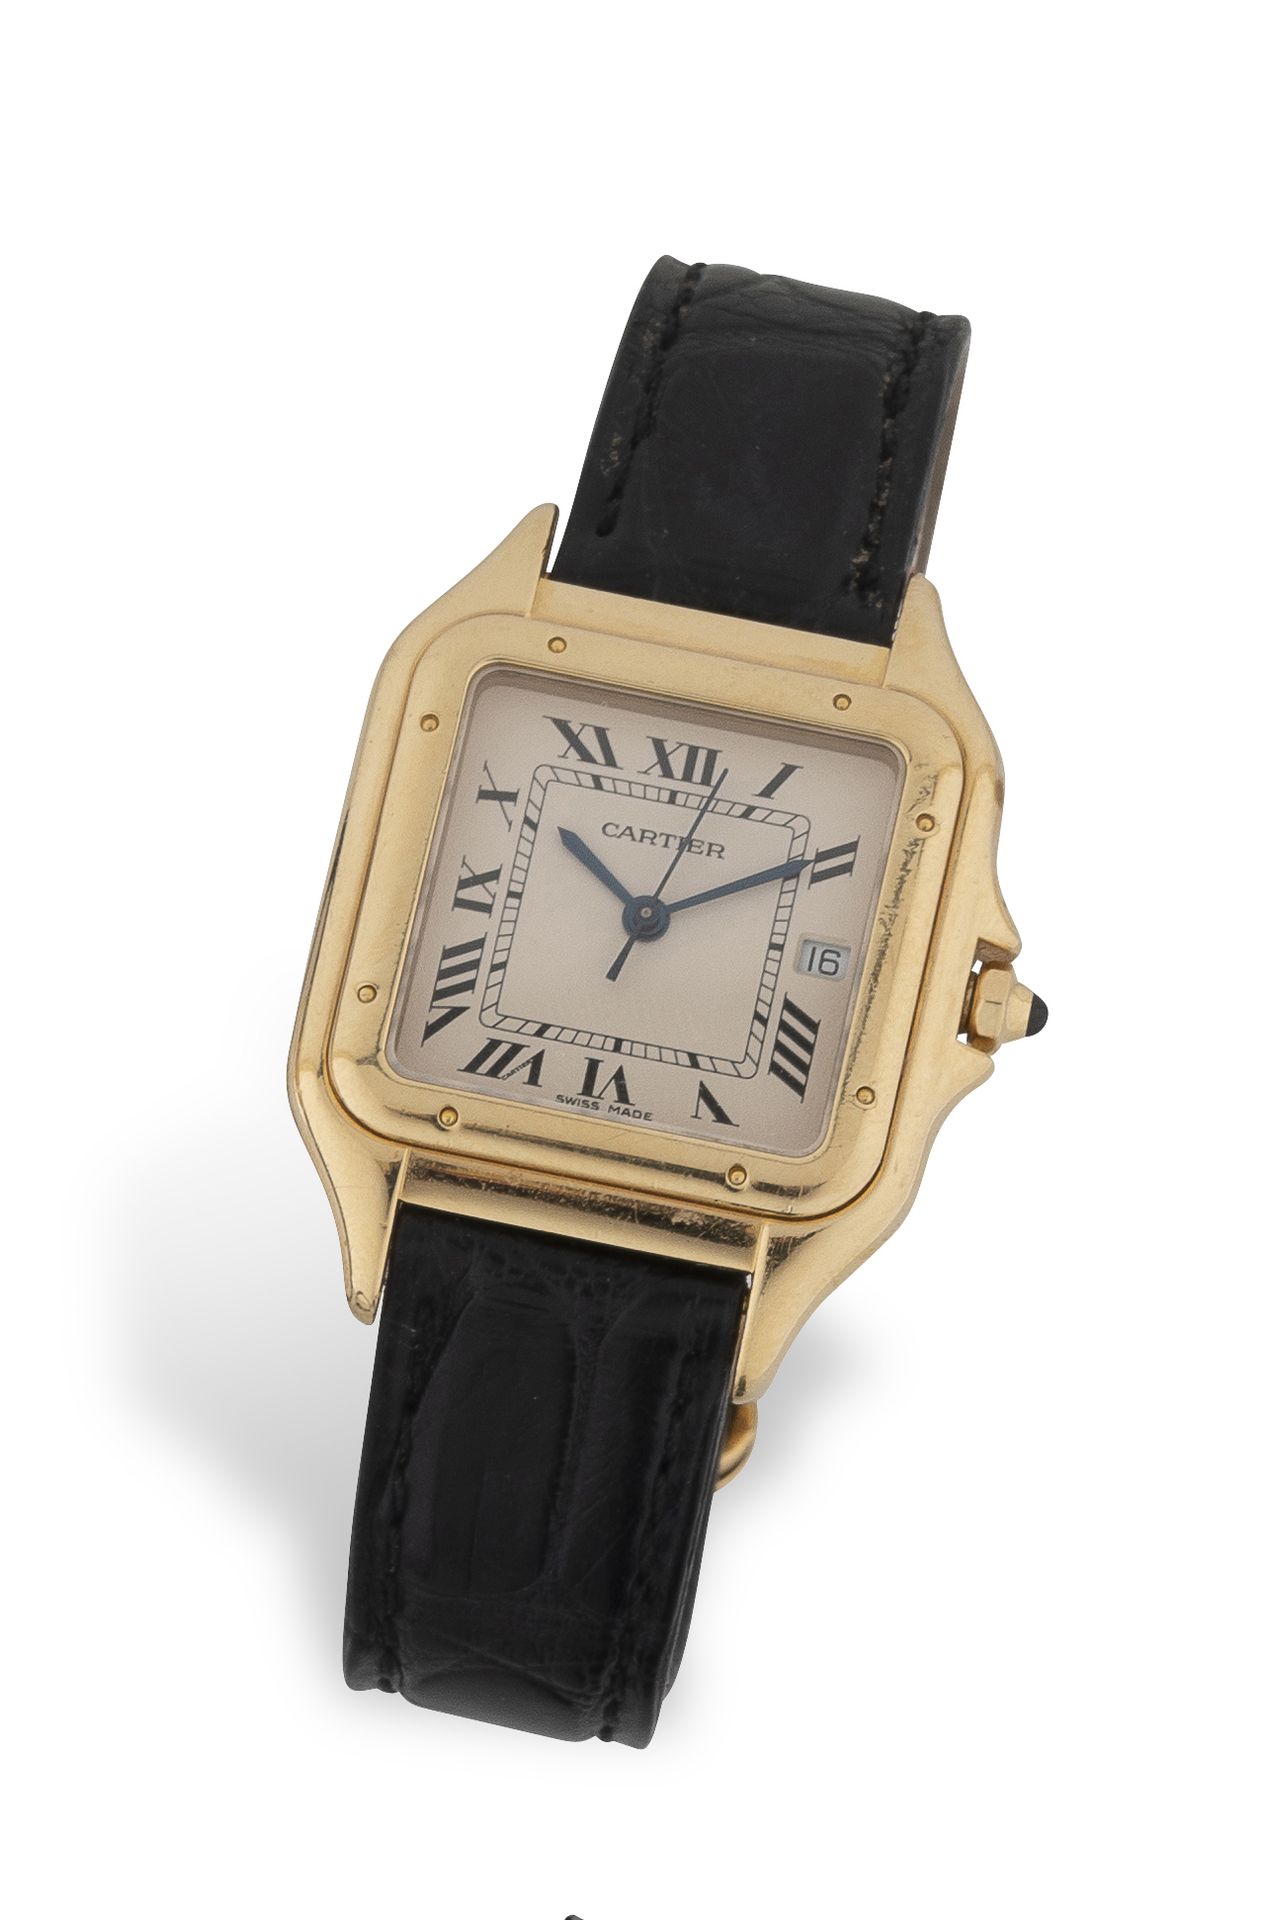 CARTIER "PANTHERE" Ladies' wristwatch in yellow gold (750).

Champagne dial with&hellip;